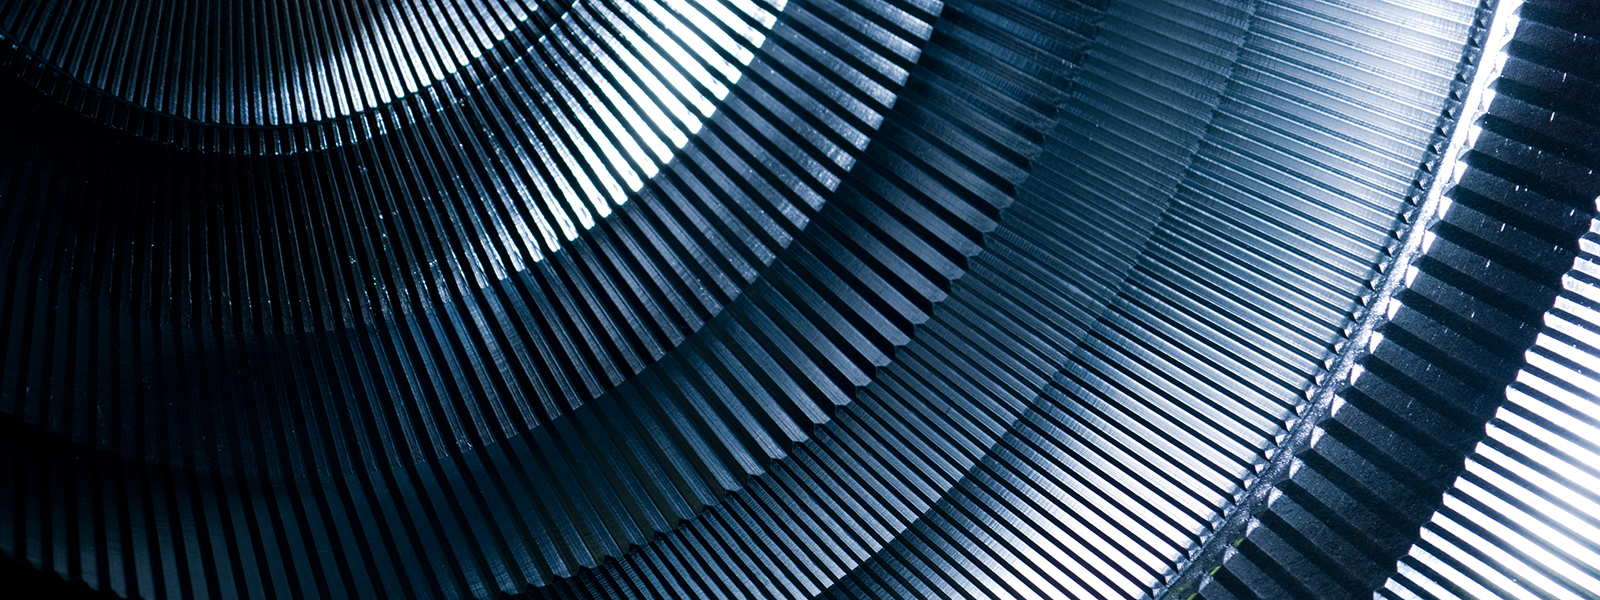 abstract Detail of Round Metal Machinery.